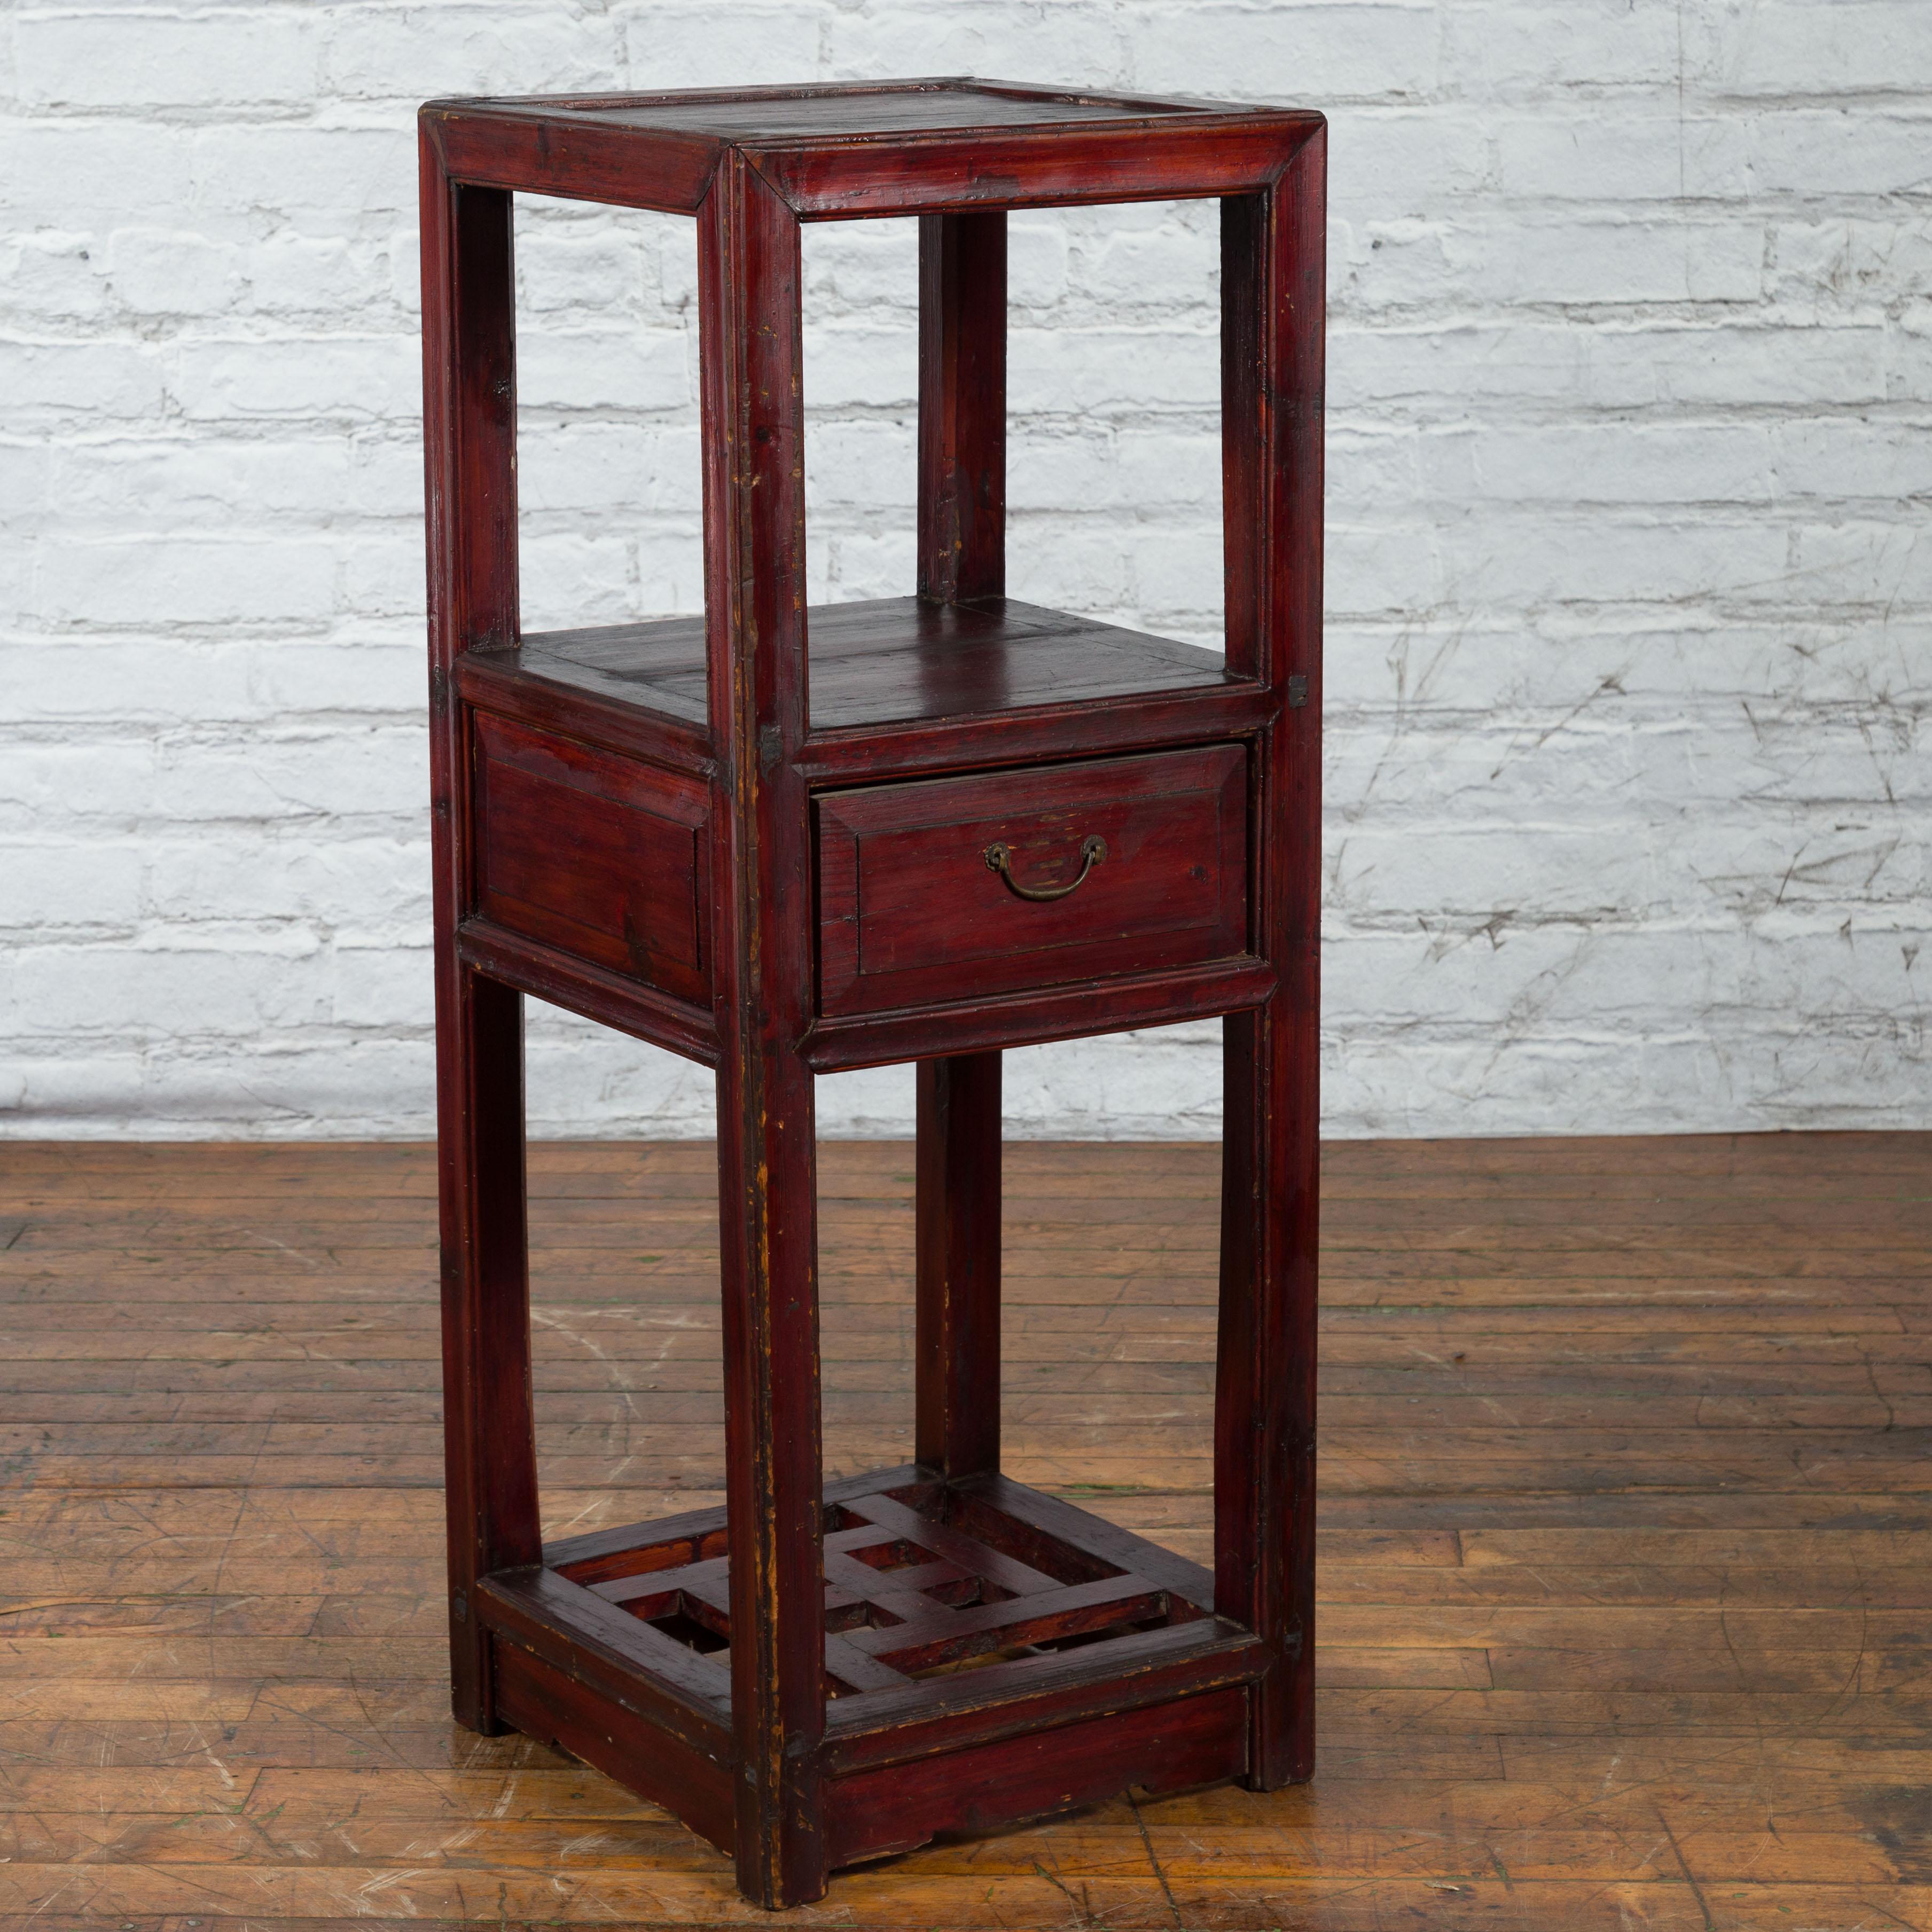 Chinese Late Qing Dynasty 1900s Tiered Table with Drawer and Fretwork Shelf For Sale 5